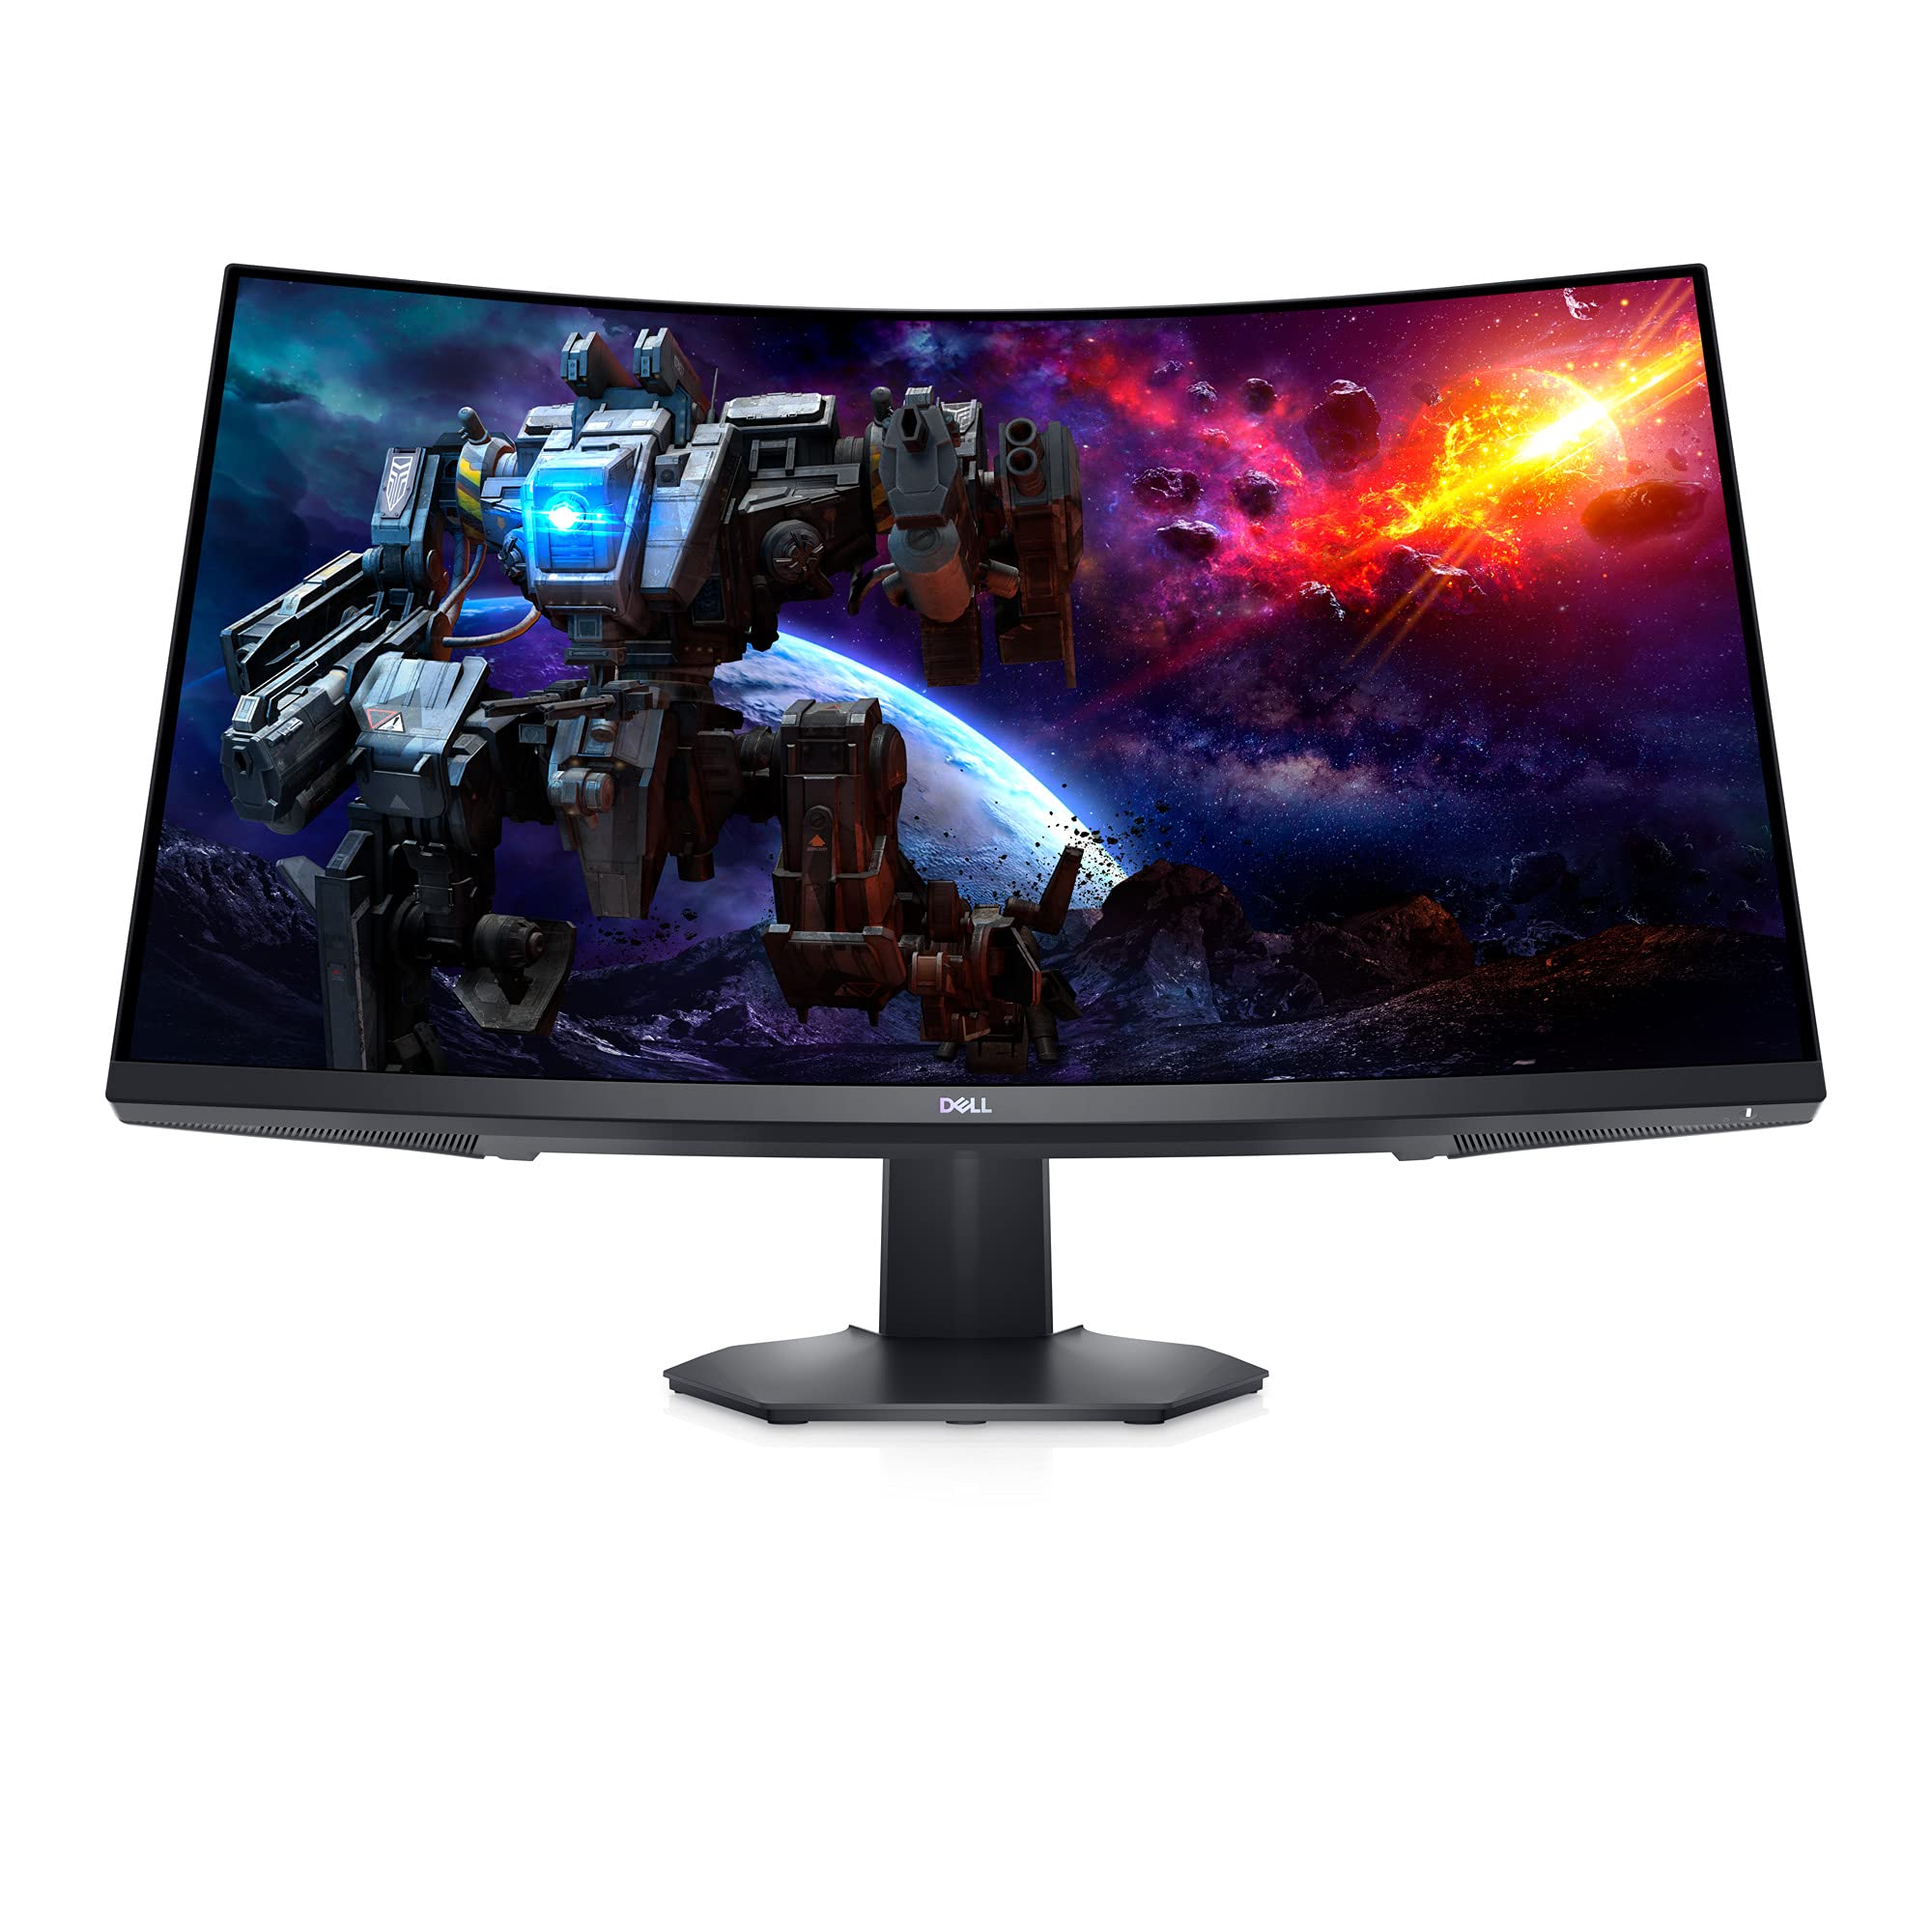 Mua Dell S3222HG 32-inch 165Hz Curved Gaming Monitor - Full HD (1920 x  1080) Display, 1800R Curvature, AMD FreeSync, 4ms Grey-to-Grey Response  Time (Super Fast Mode),  Million Colors - Black trên